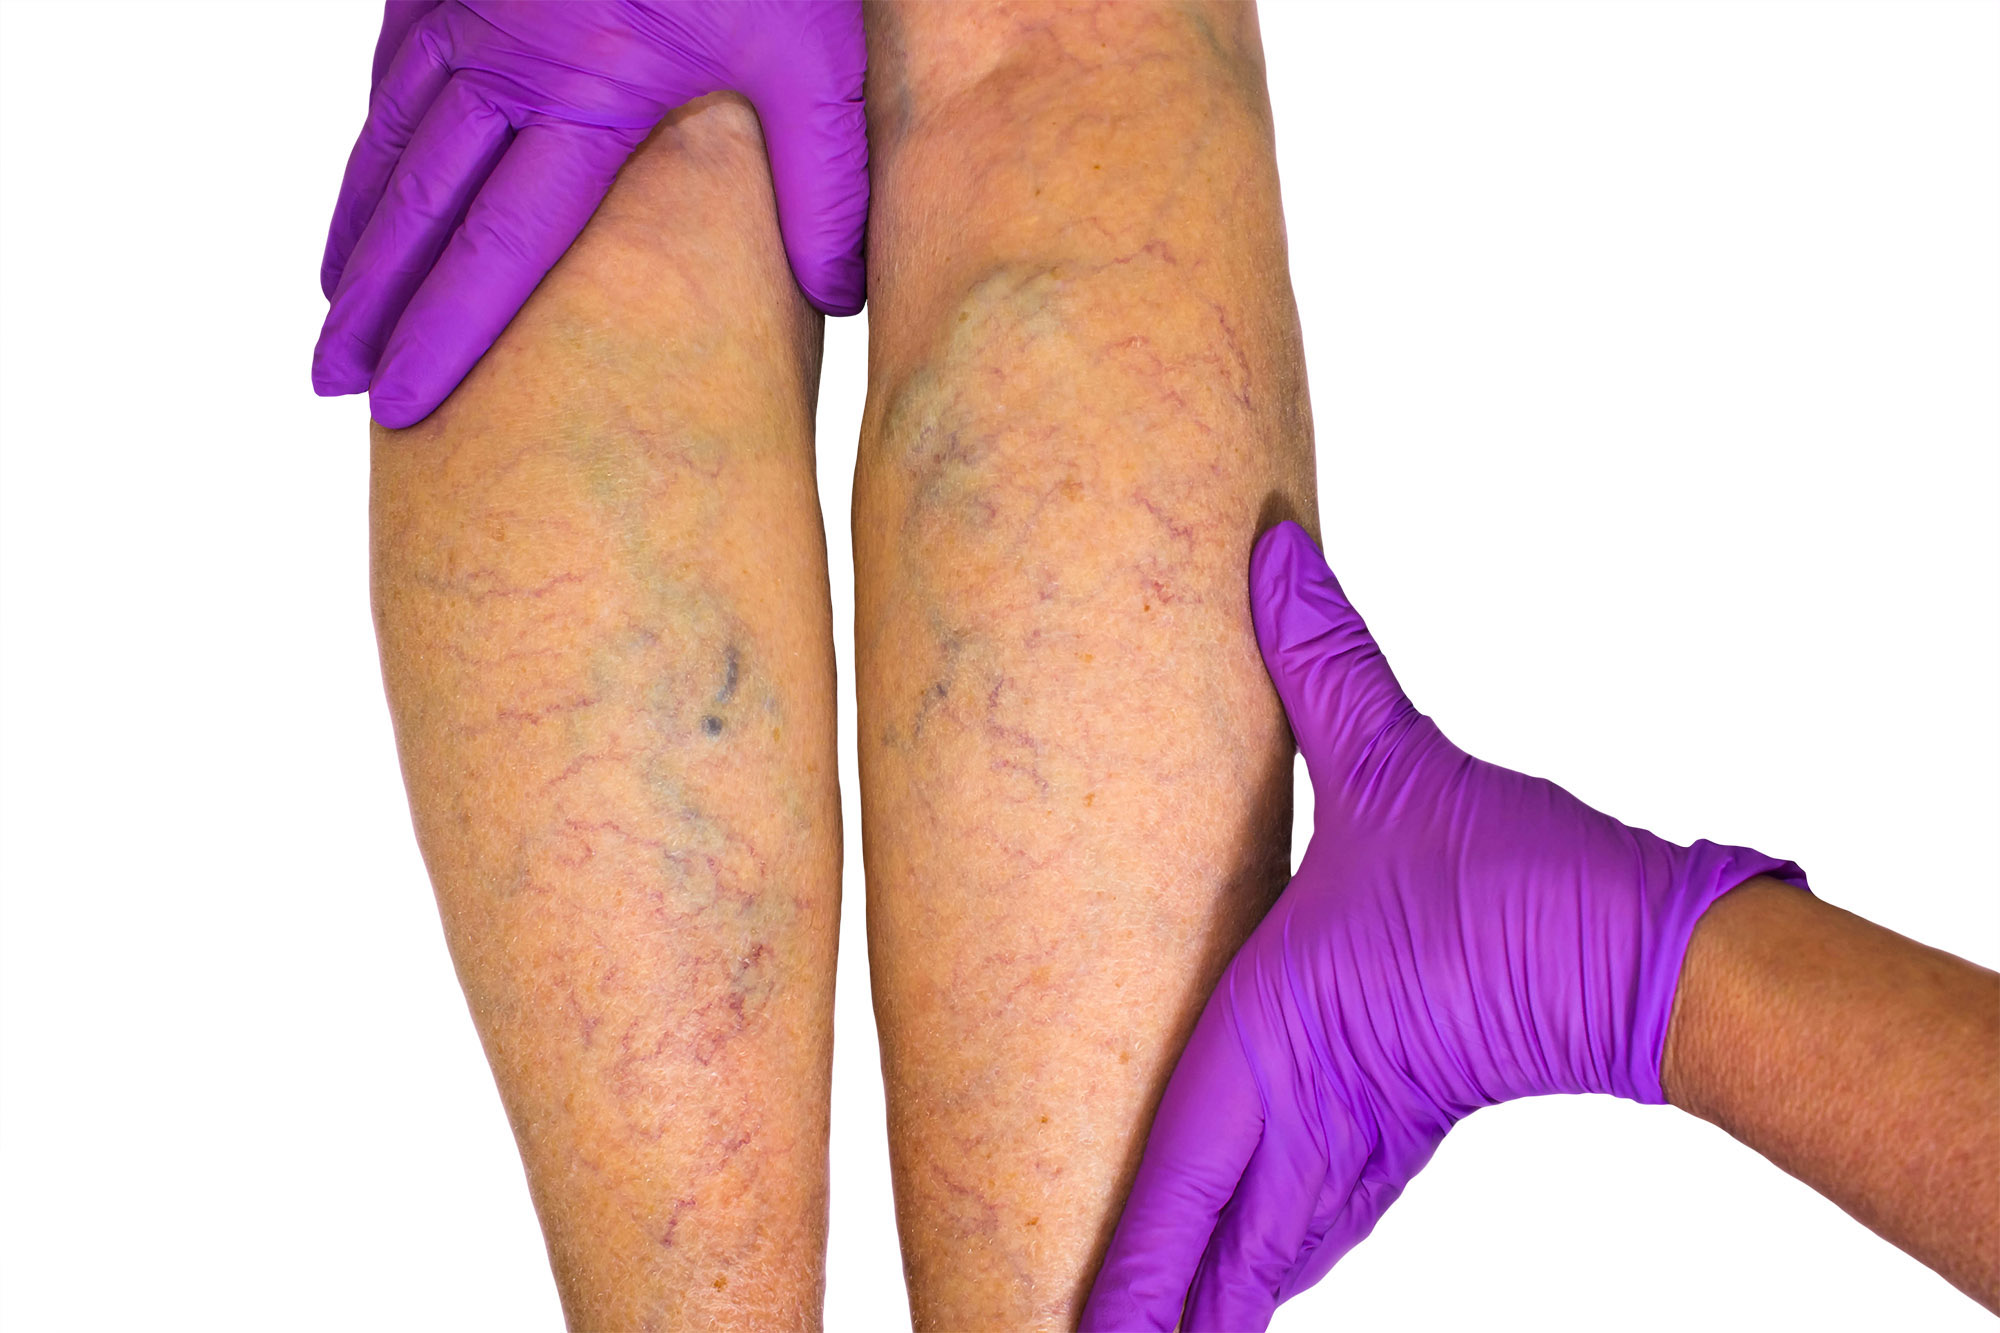 Capitol Vein & Laser Centers - Compression is essential for safe summer  travel! 📲If you have varicose veins, leg swelling or pain, it's time to  visit Capitol Vein and Laser Centers. Call